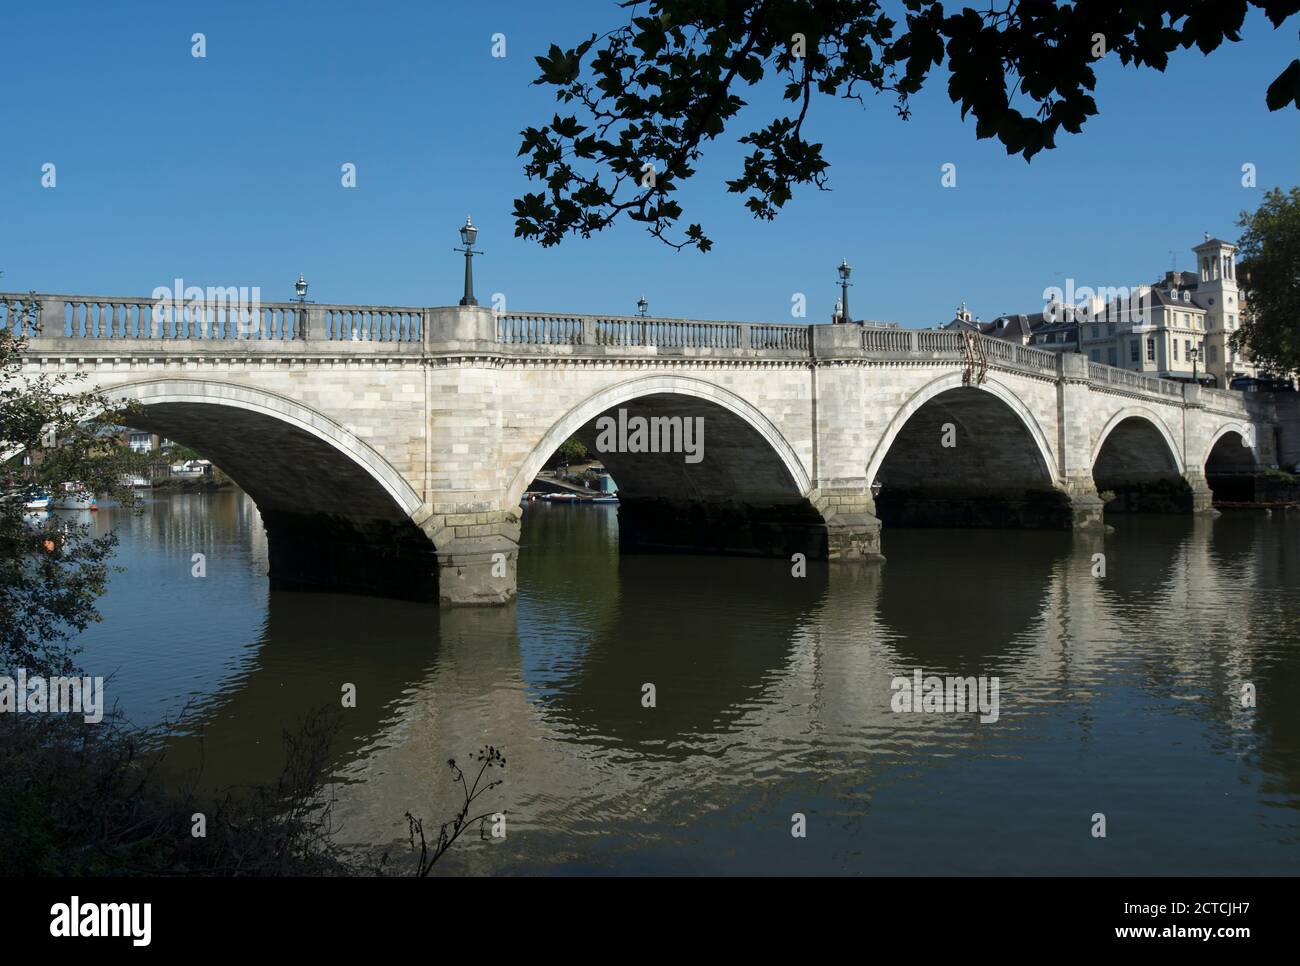 richmond bridge, spanning the river thames between richmond and east twickenham, seen from the twickenham side in early autumn Stock Photo